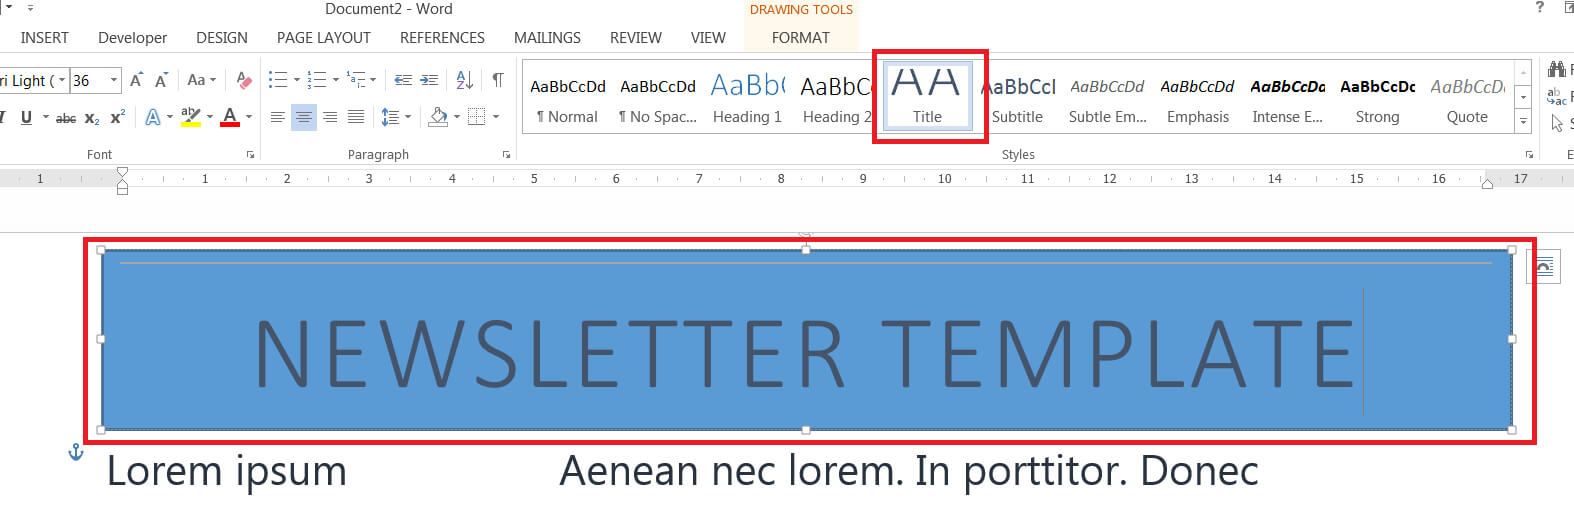 How To Easily Create A Newsletter Template In Microsoft Word Inside Banner Template Word 2010